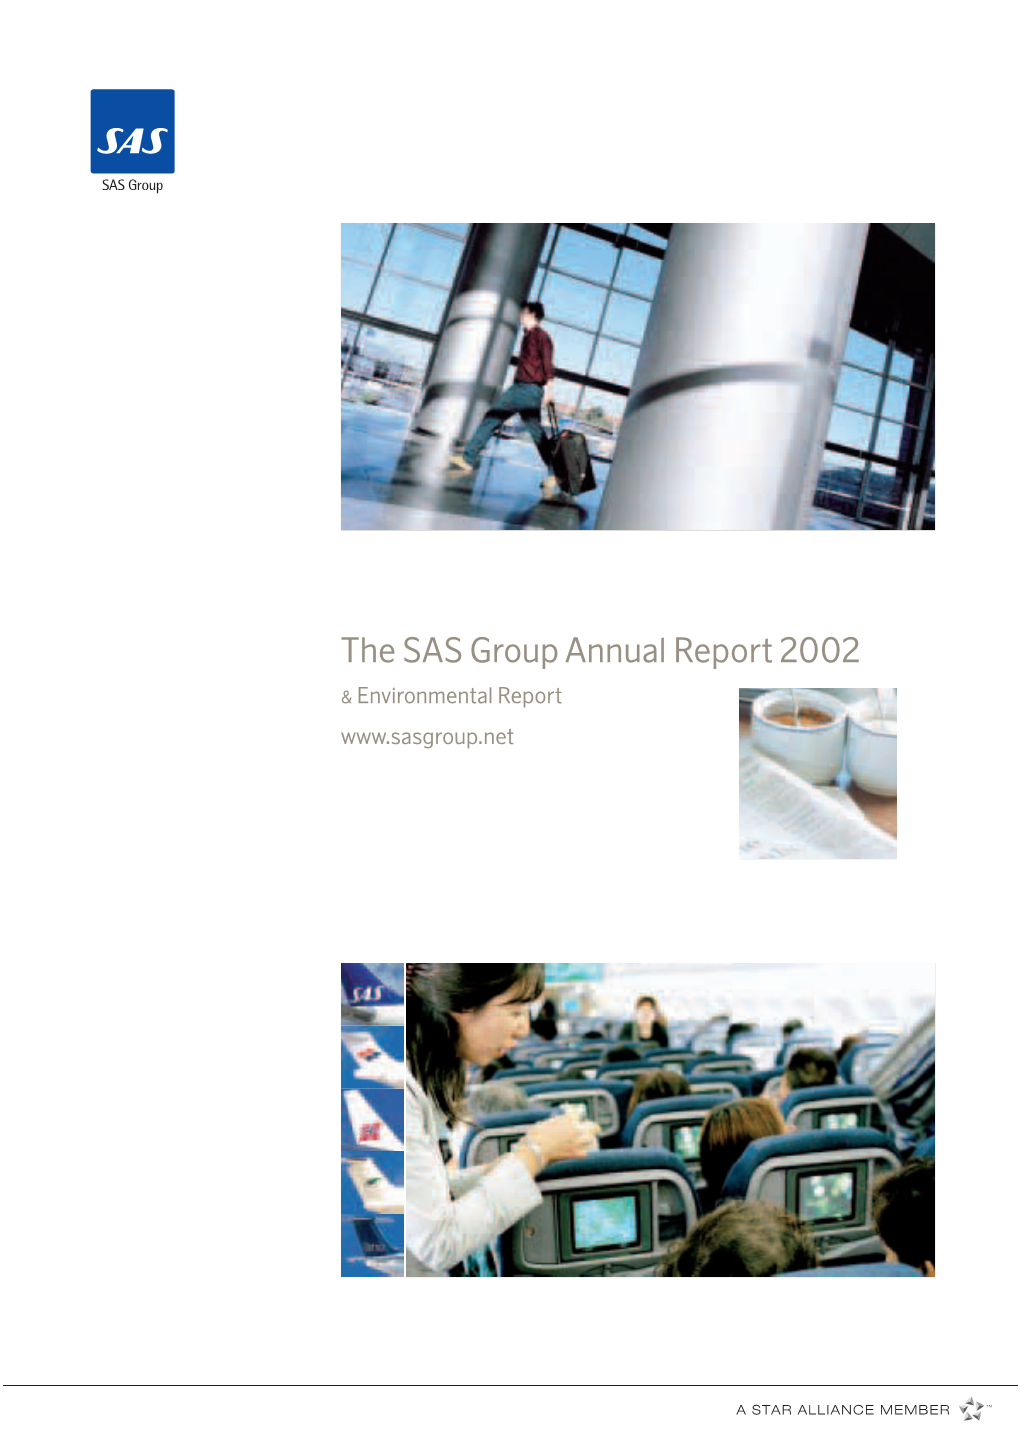 The SAS Group Annual Report 2002